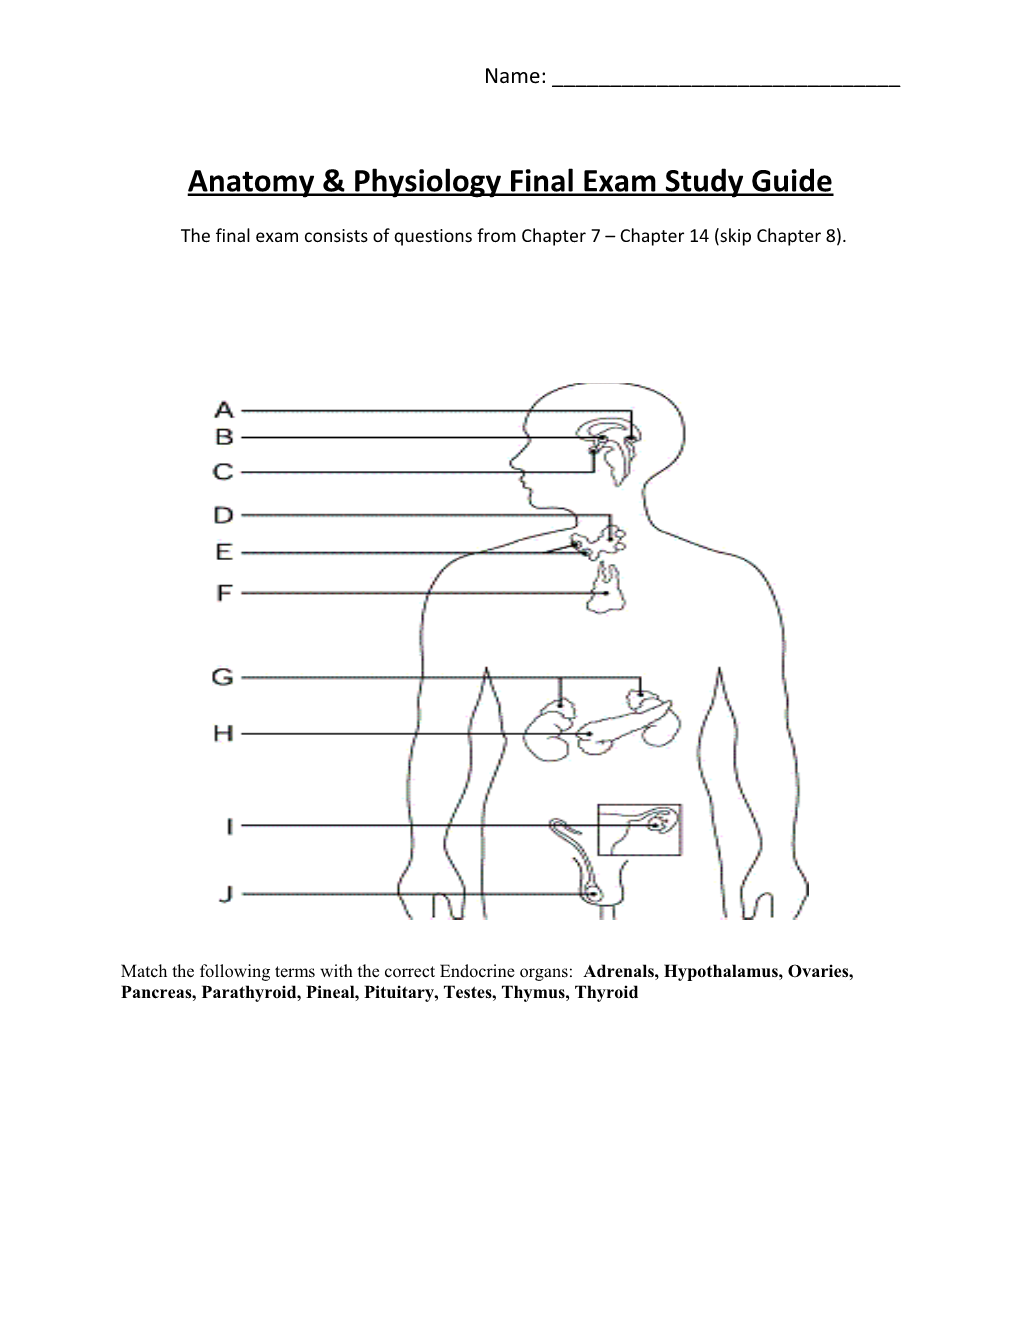 Anatomy & Physiology Final Exam Study Guide